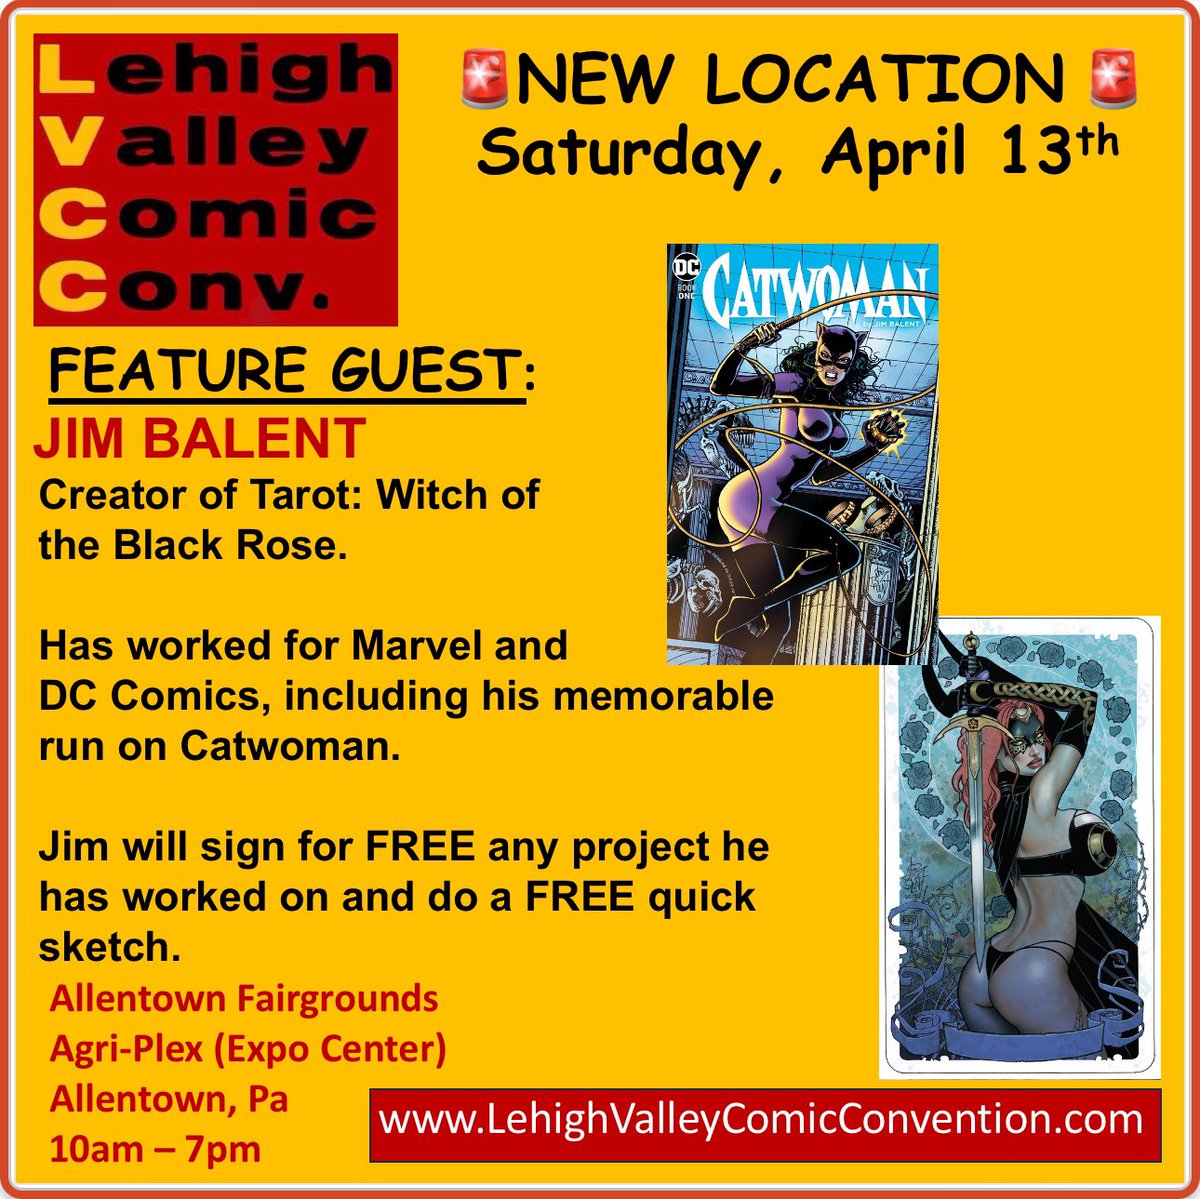 Sat 4/13 Guest - JIM BALENT will sign for FREE any project he has worked on & do a FREE quick sketch. Details @ LehighValleyComicConvention.com #catwoman #ComicArt #comicartist #Collectibles #comicbook #comicbookart #comicbooks #Collector #comics @CBNostalgia @CoolComicArt @ComicFGT